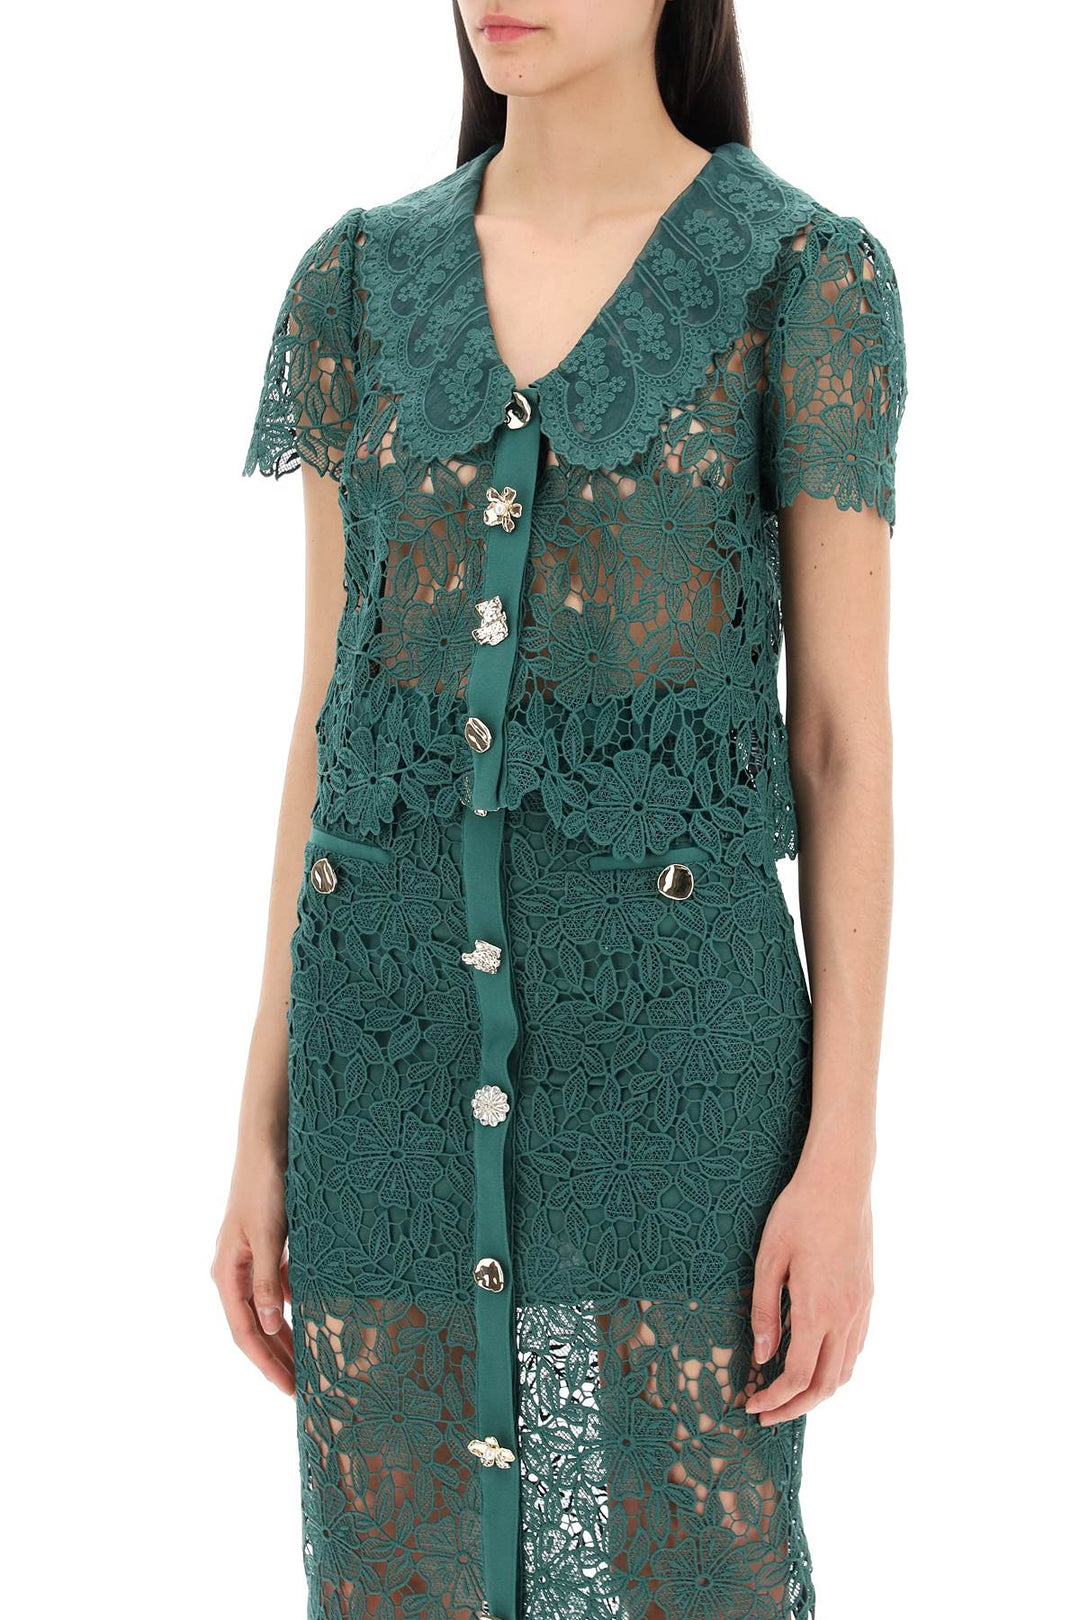 Self Portrait Chelsea Lace Guipure Top With Collar   Green